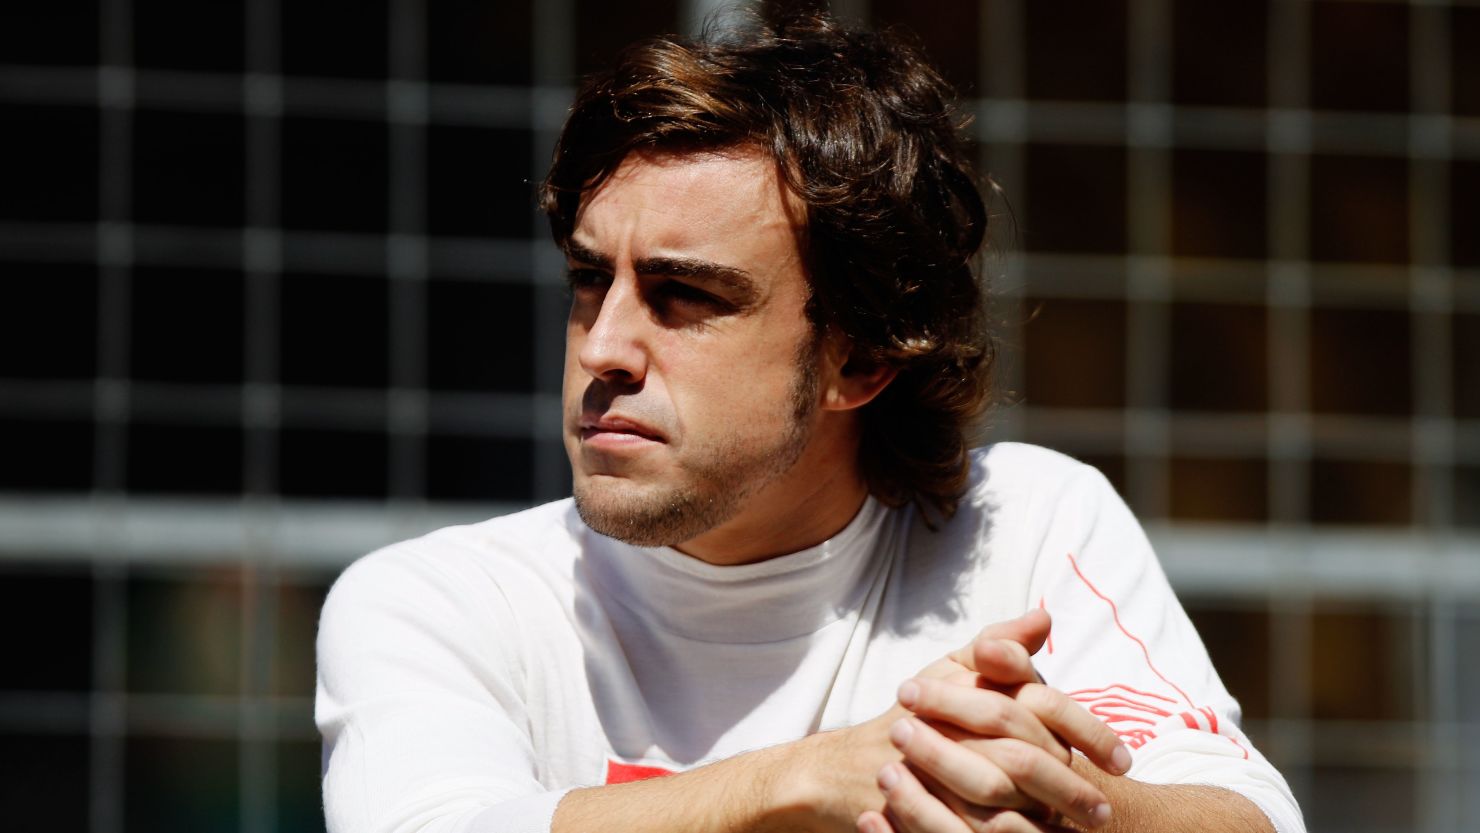 Ferrari's Fernando Alonso finished fourth in this season's Formula One drivers' championship.